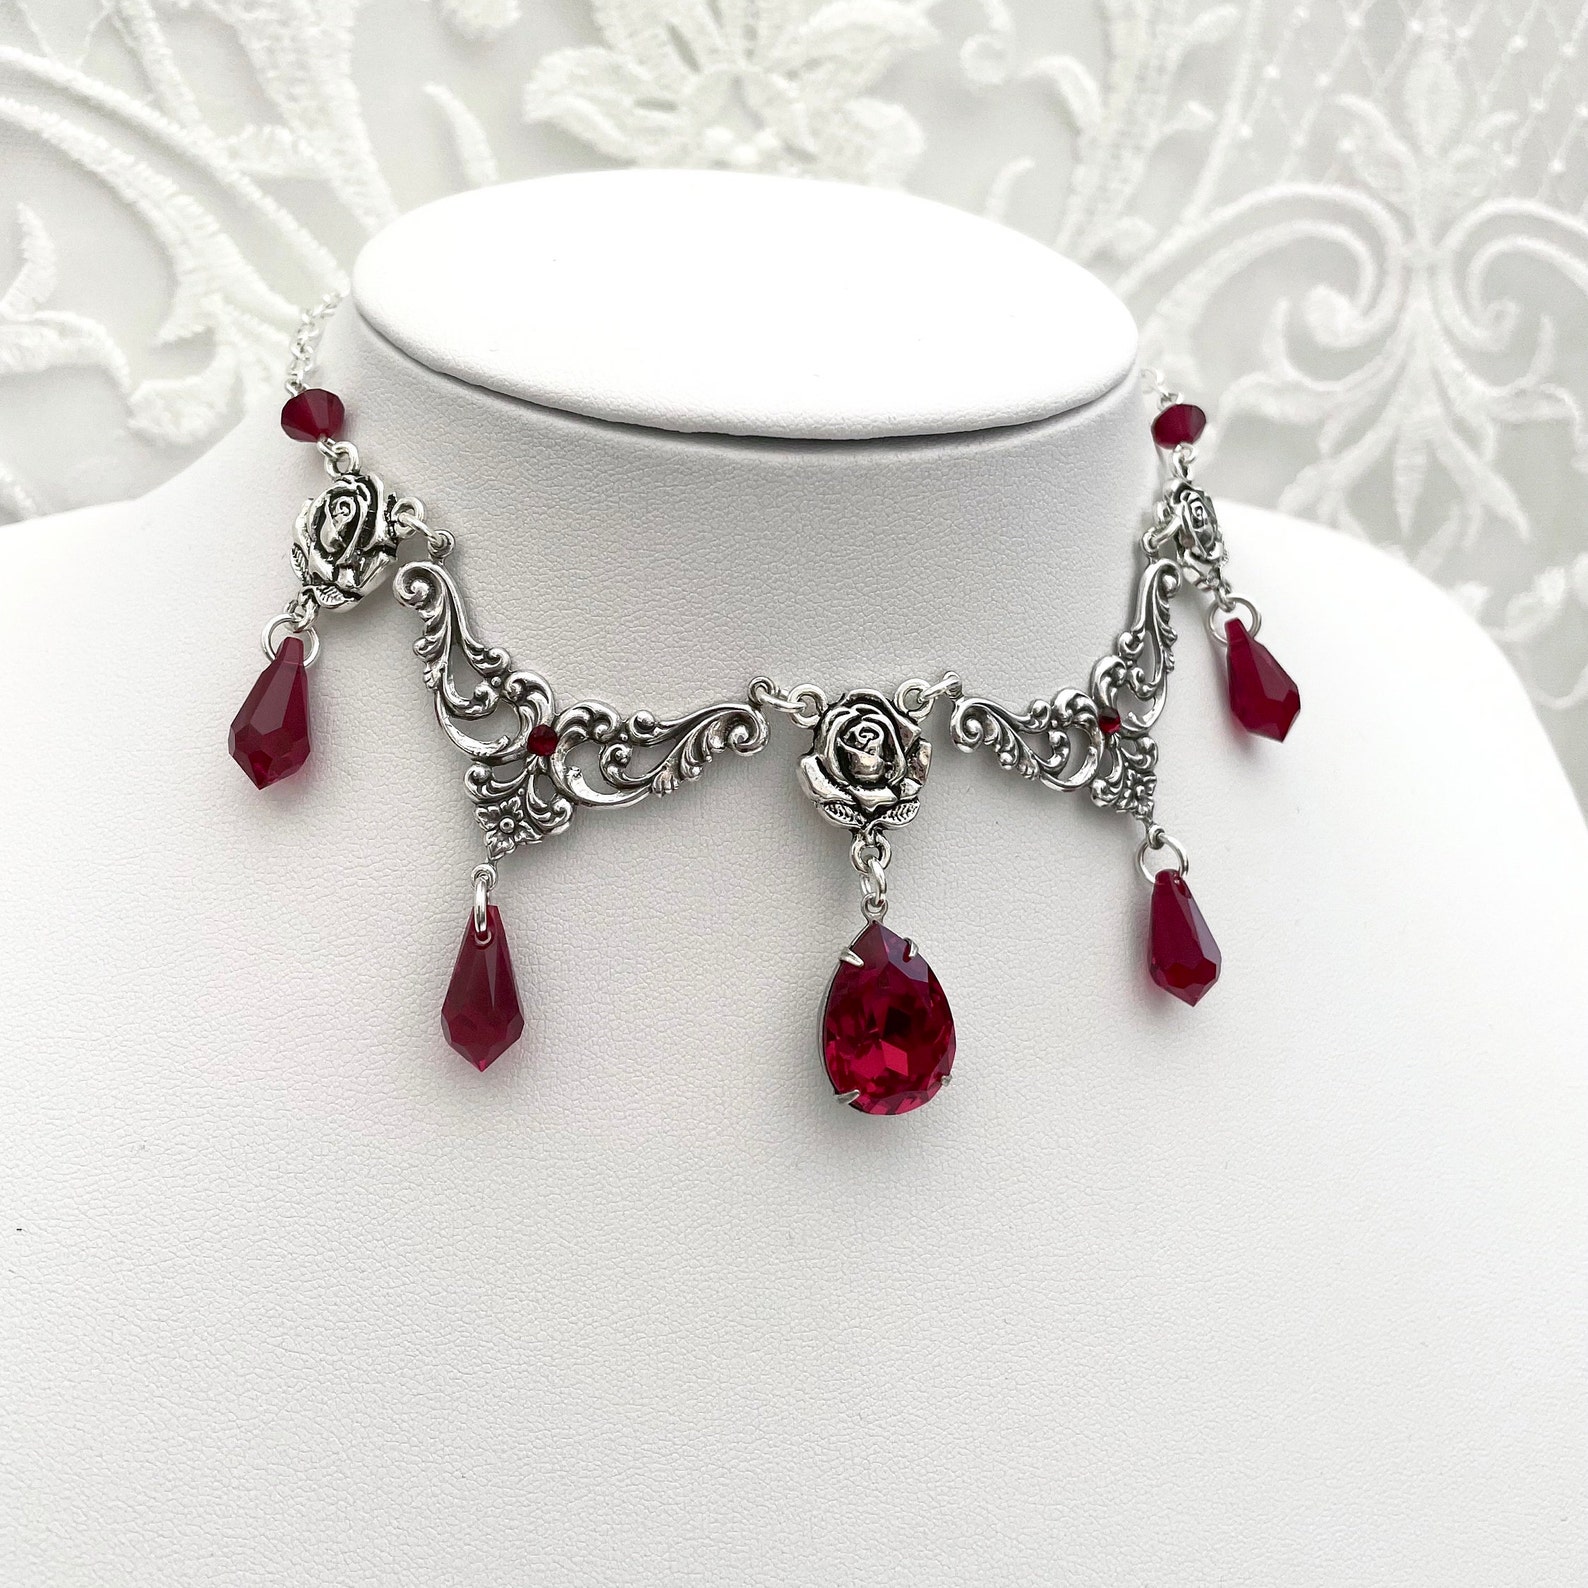 Silver Tone Gothic Red Drop Necklace Gothic Choker Silver - Etsy